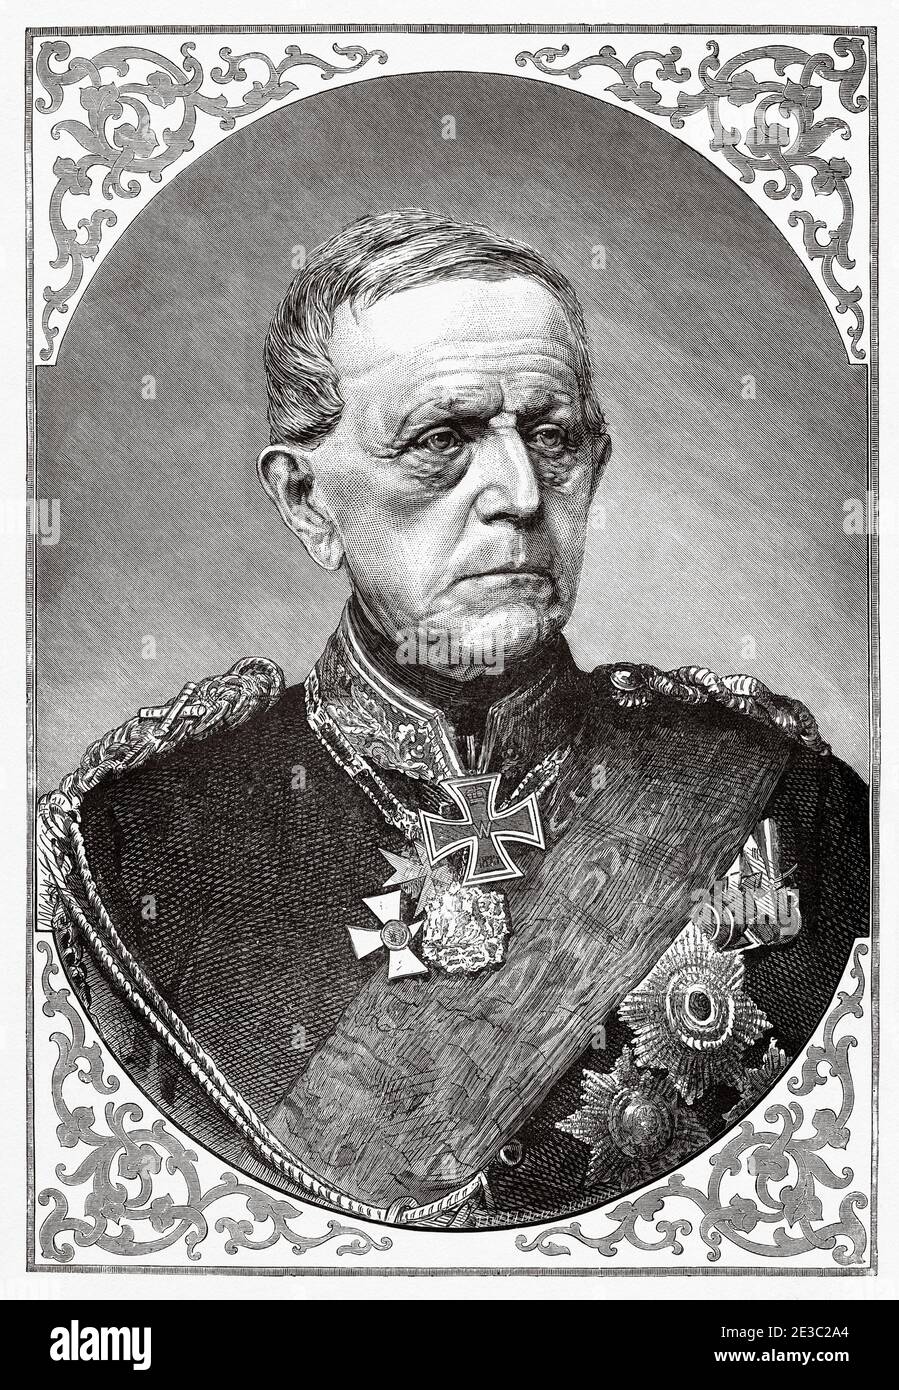 Portrait of Helmuth Karl Bernhard Count von Moltke (1800 - 1891) German Field Marshal, Chief of the Prussian General Staff, known as Moltke the Elder, Germany. Old XIX century engraved illustration from La Ilustracion Española y Americana 1890 Stock Photo